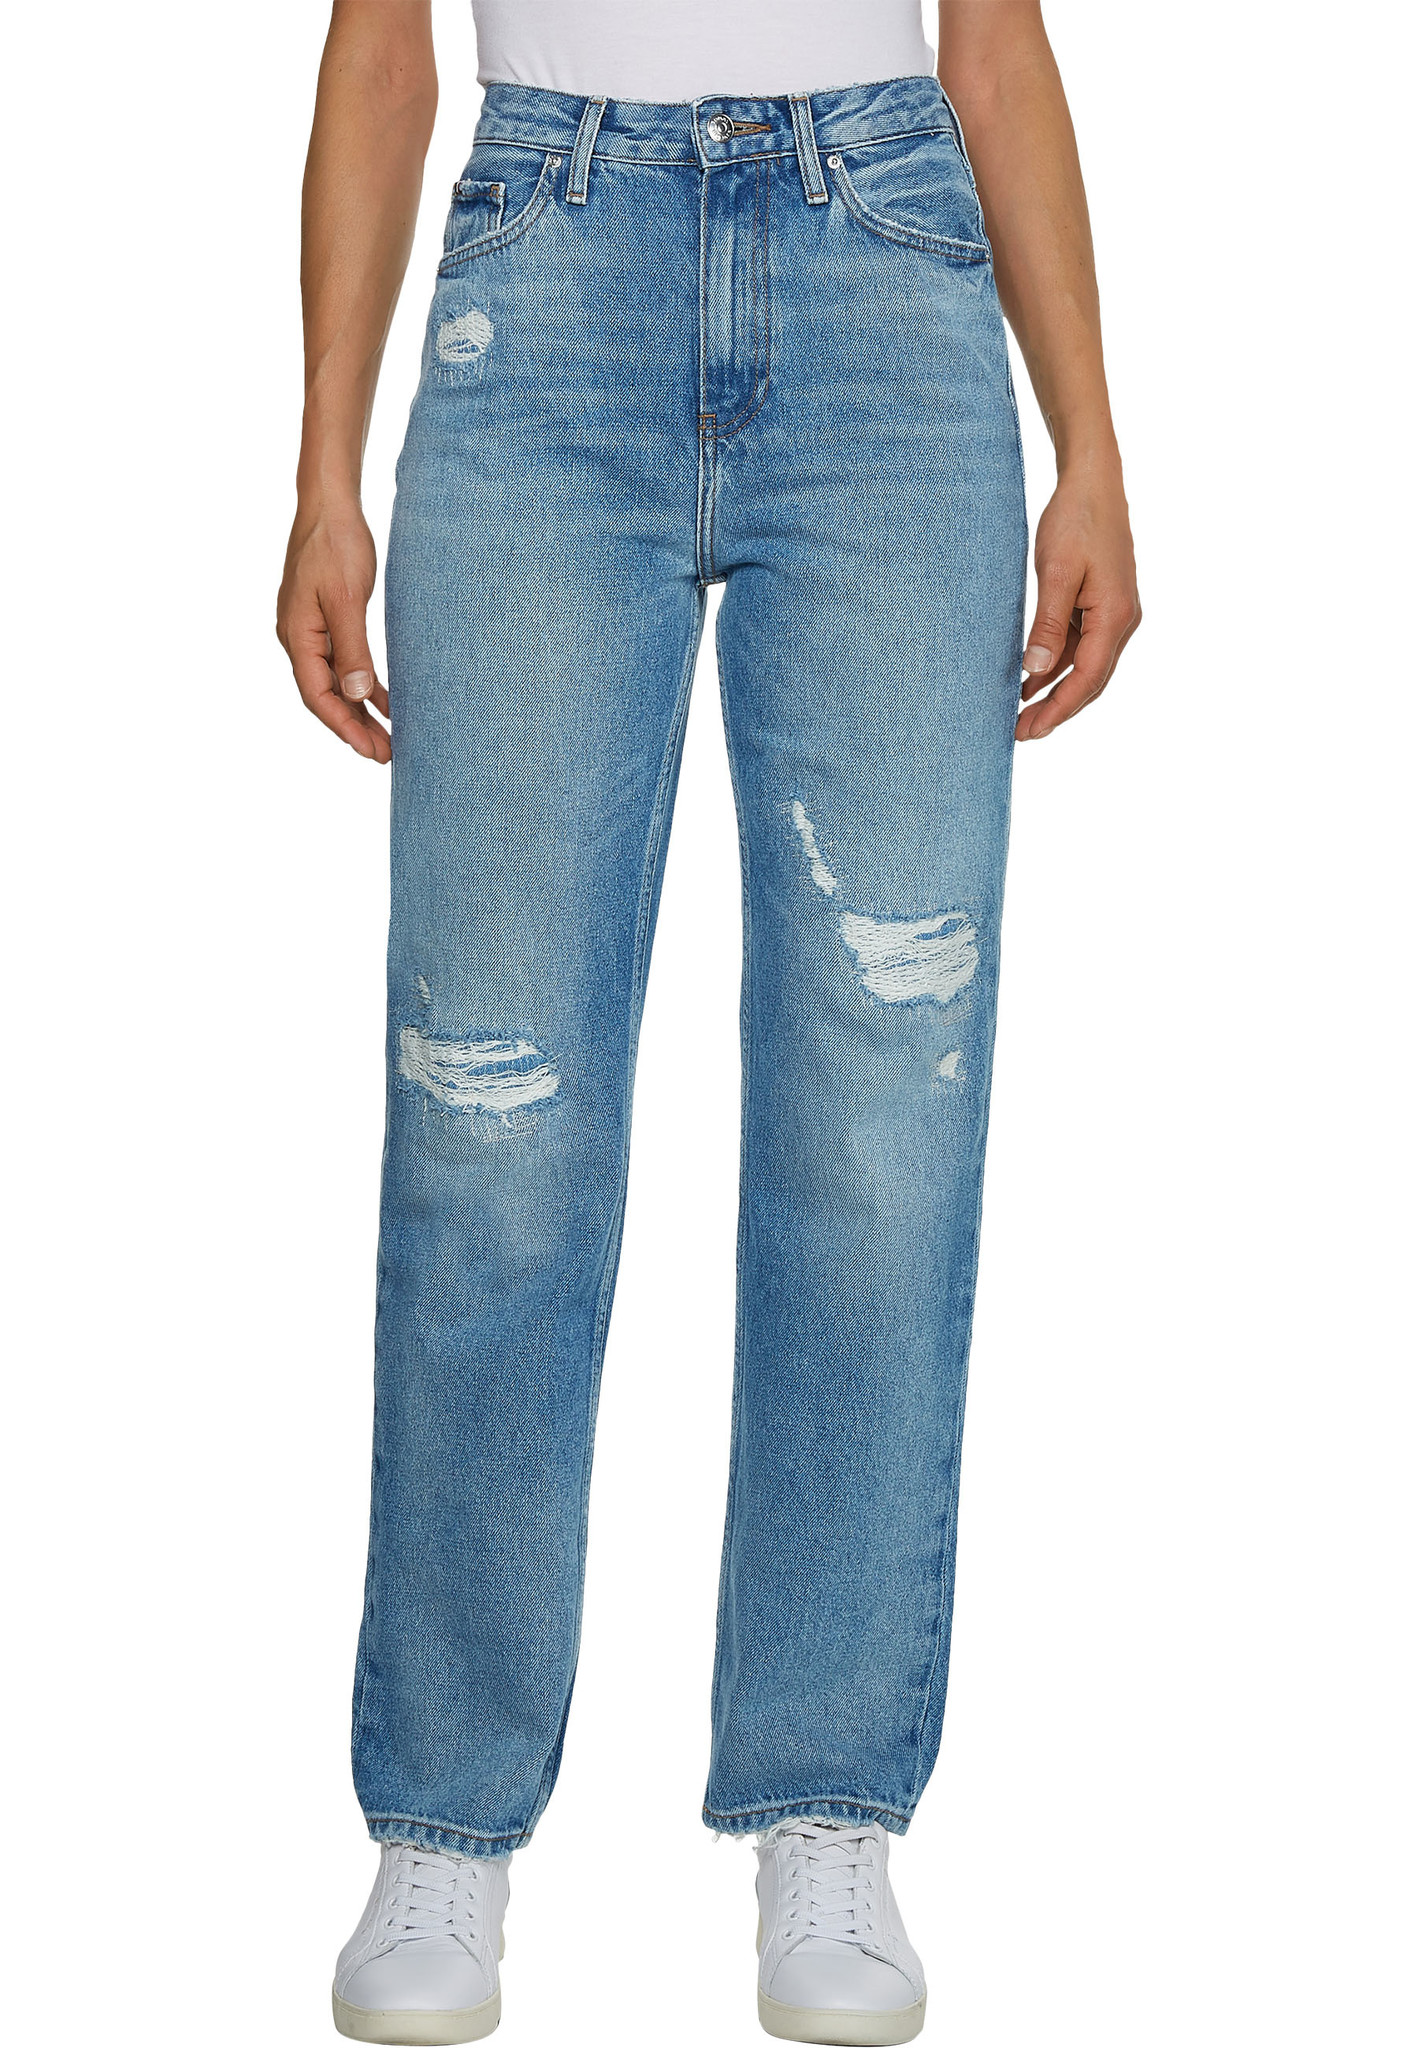 Tommy Hilfiger New Classic Straight Jeans Lichtblauw Dames maat 29/30